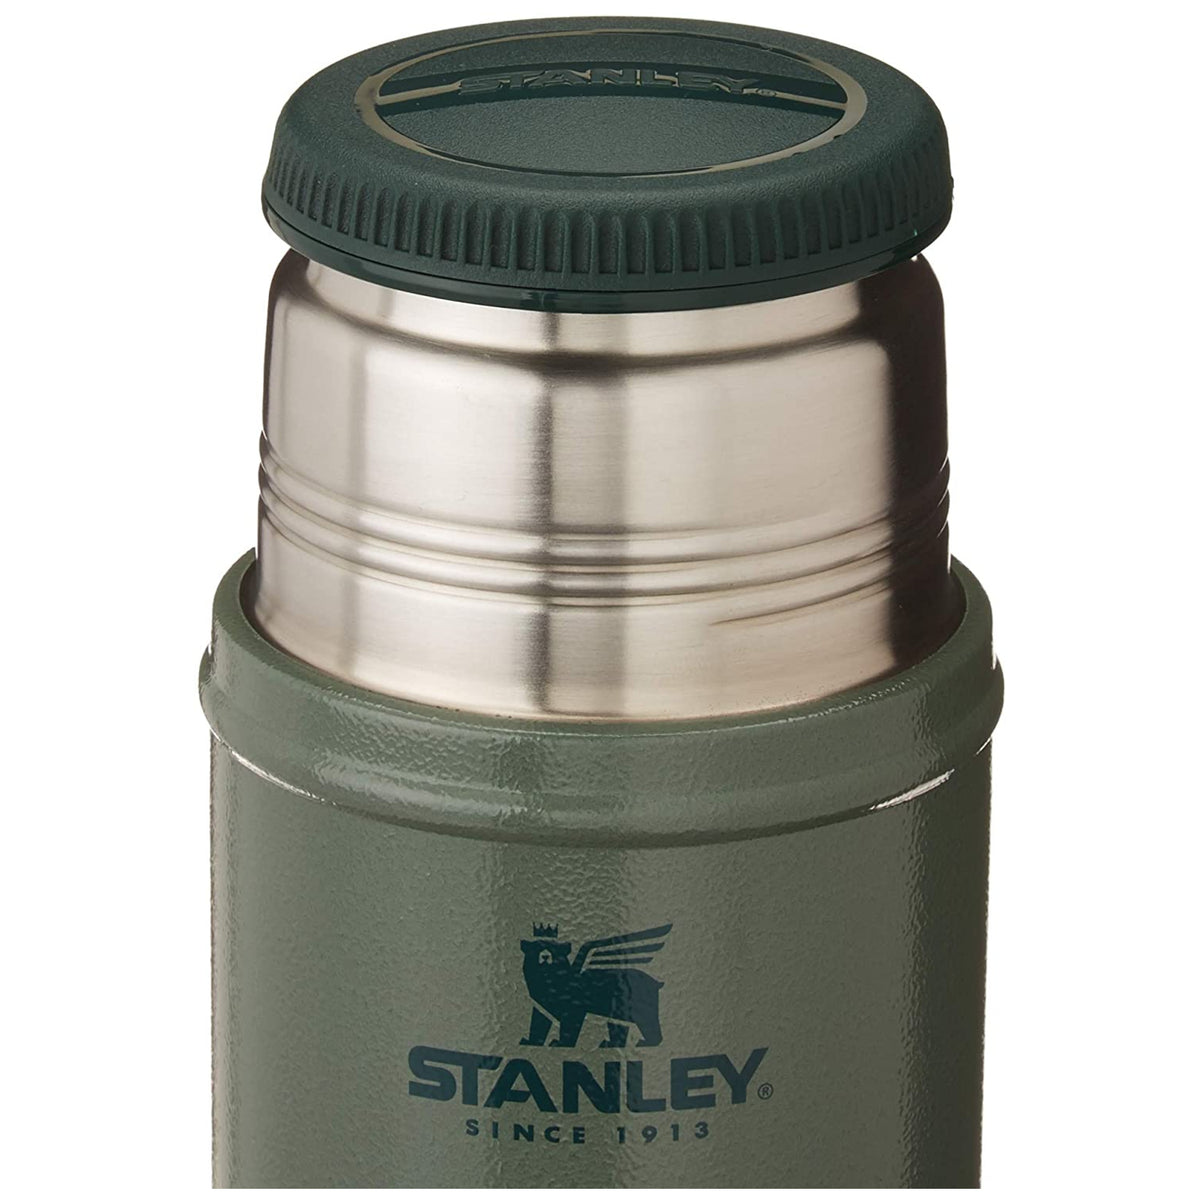 Stanley 10-07937-001 Wide Mouth Vacuum Bottle, Hammertone Green, Stainless Steel